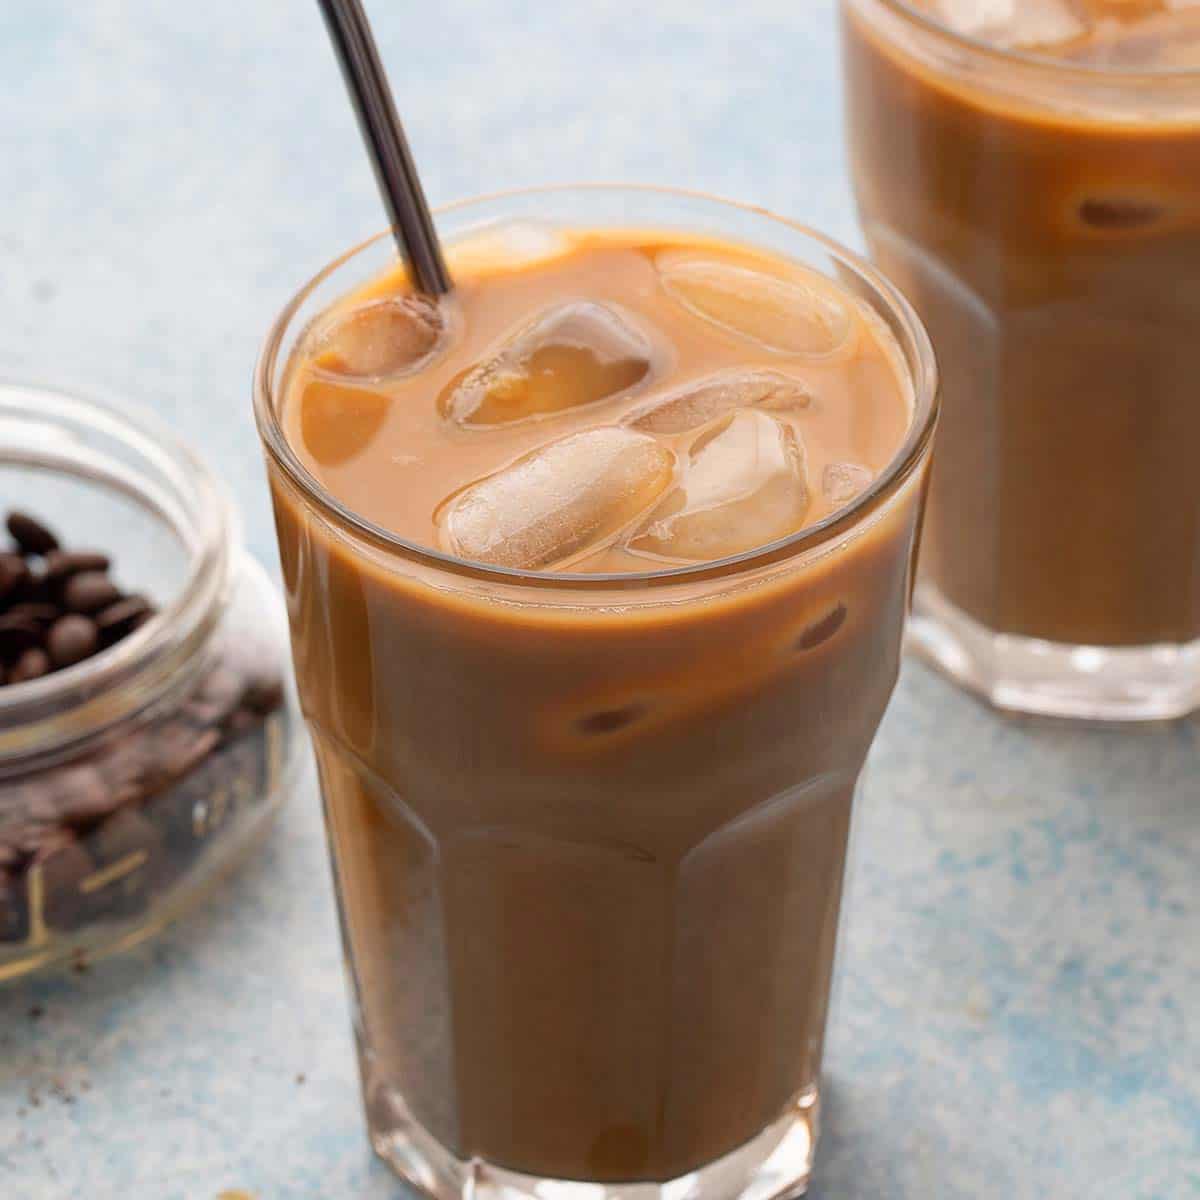 iced coffee in glasses with straw.